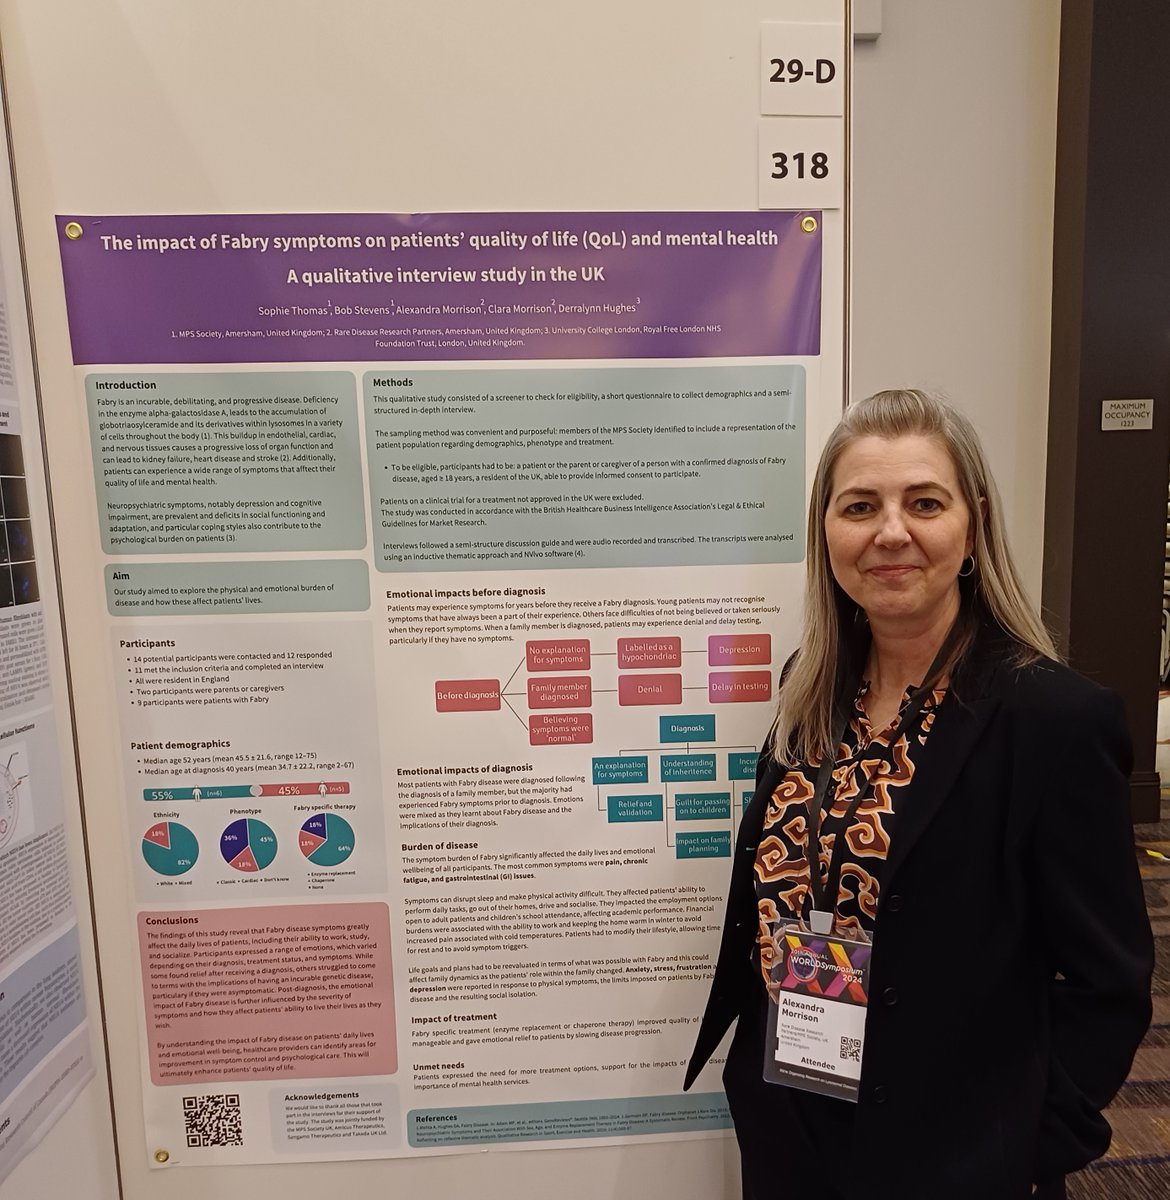 RDRP and @MPSSocietyUK will be presenting work on the emotional impacts of Fabry disease during the #WORLDSymposia poster session today - Thursday 8th February.  You'll find us at Kiosk 29, poster number 318. We look forward to seeing you there #research #rarediseases #fabry